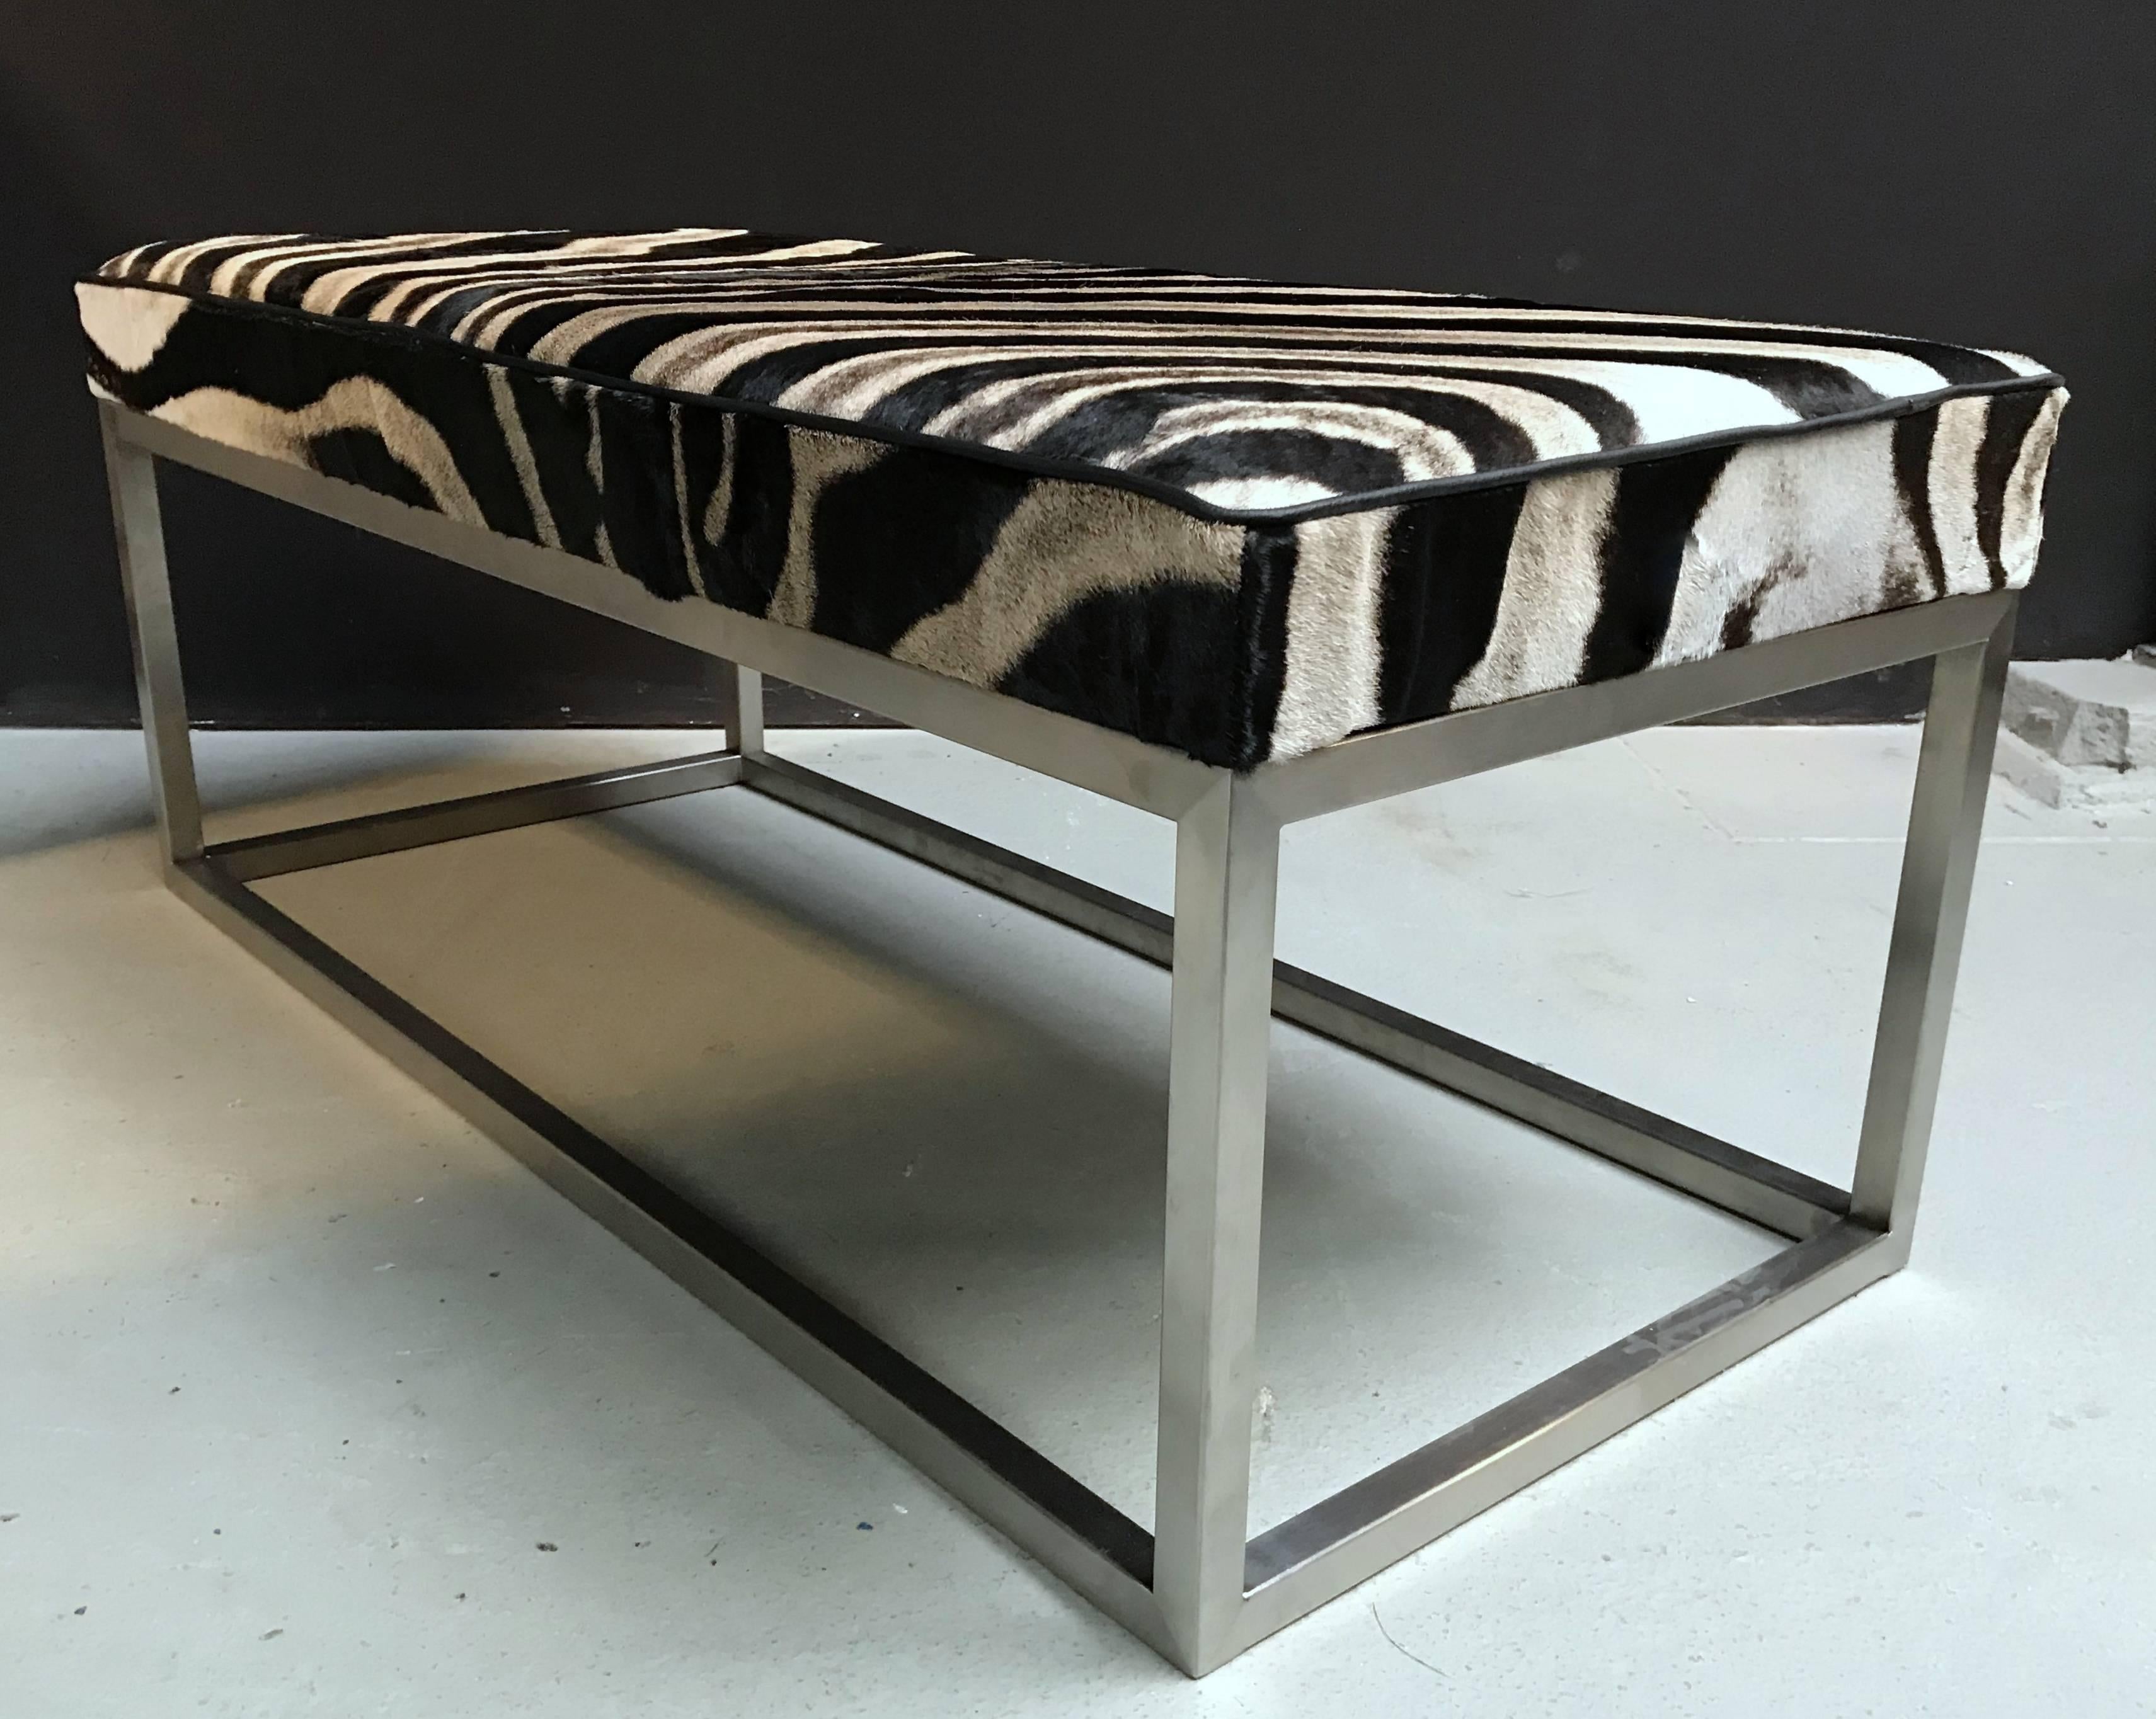 Elegant coffee table, top Burchell zebra skin with a black leather piping on the edges.
Stainless steel frame.

 